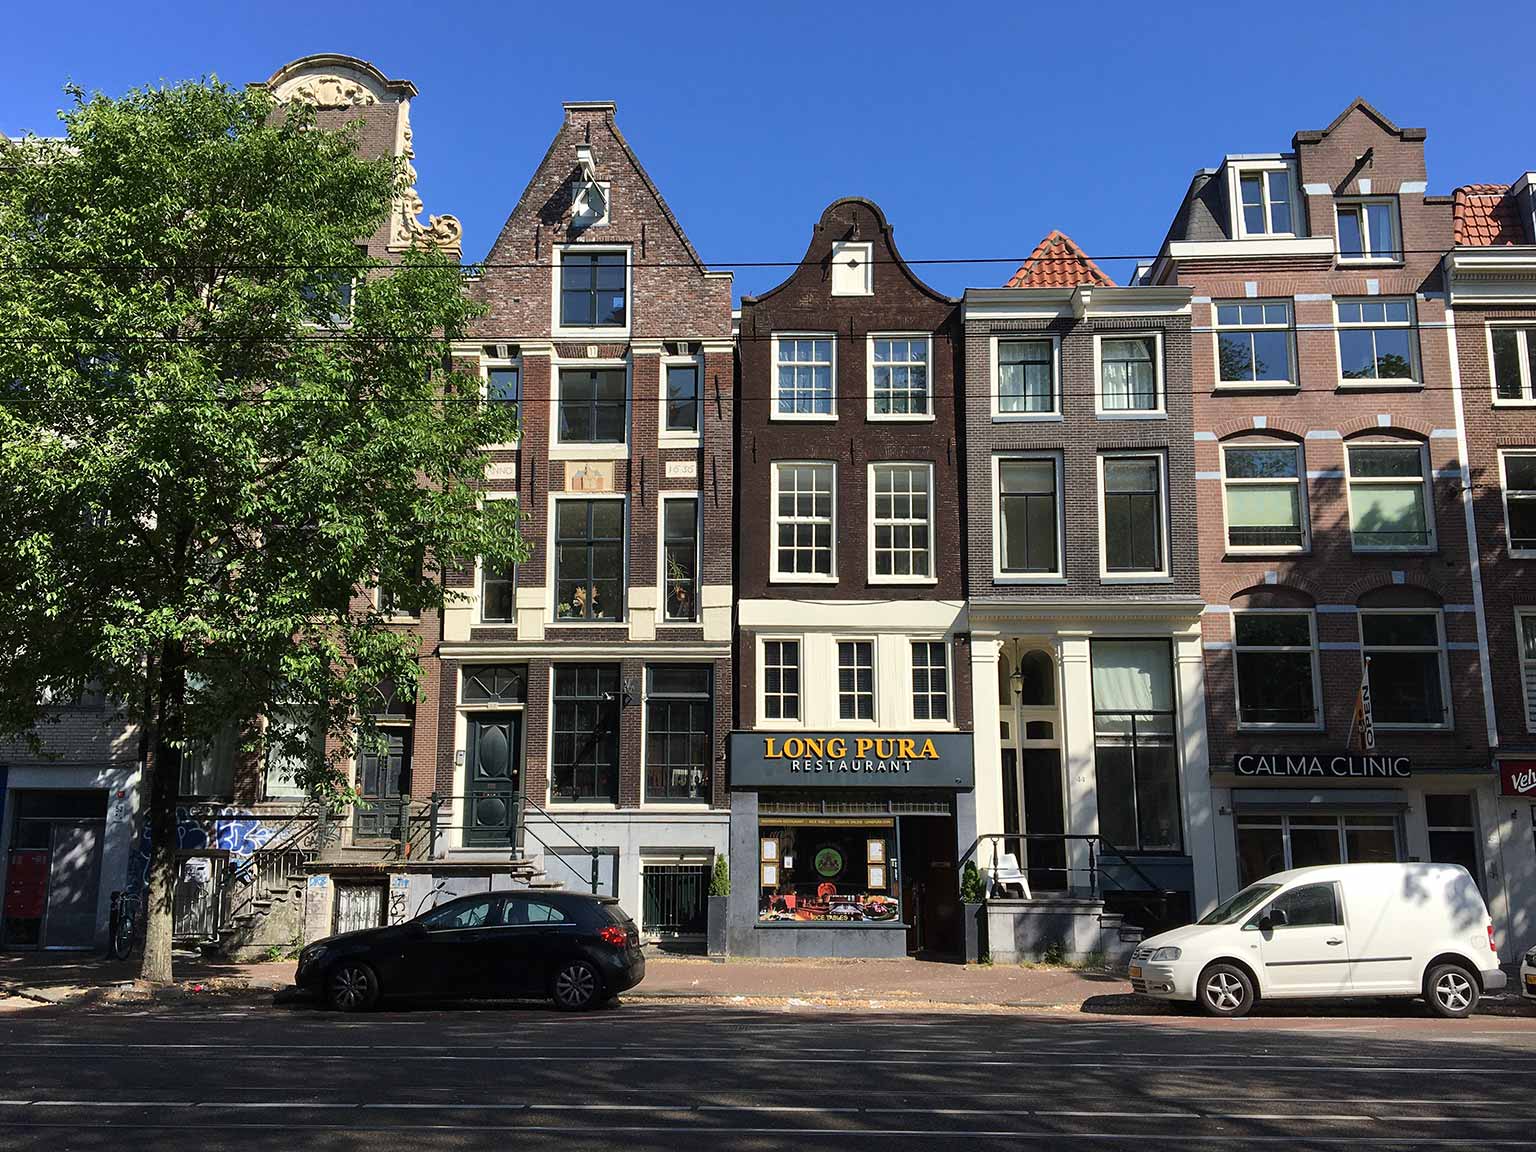 Rozengracht 48, Amsterdam, house with the Noorderkerk on a gable stone